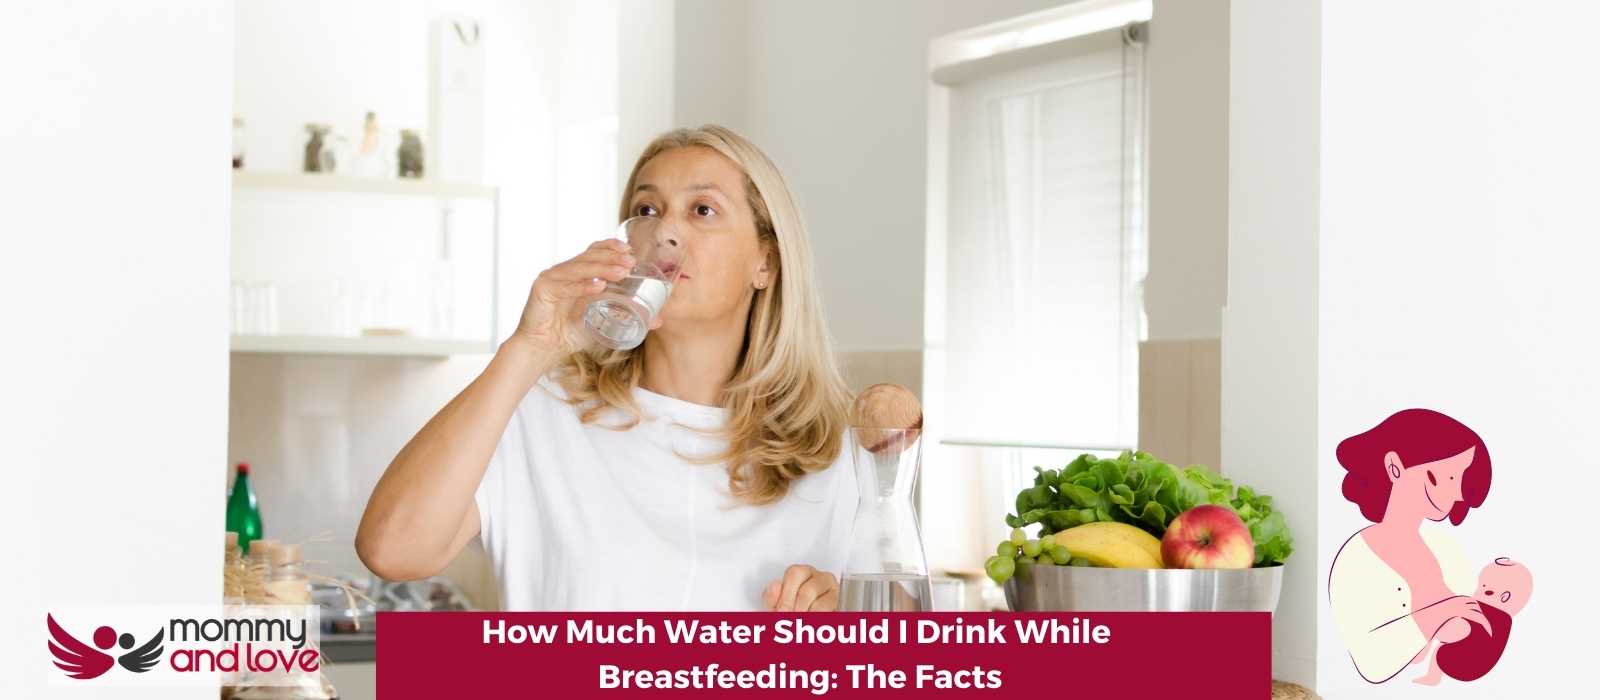 How Much Water Should I Drink While Breastfeeding: The Facts